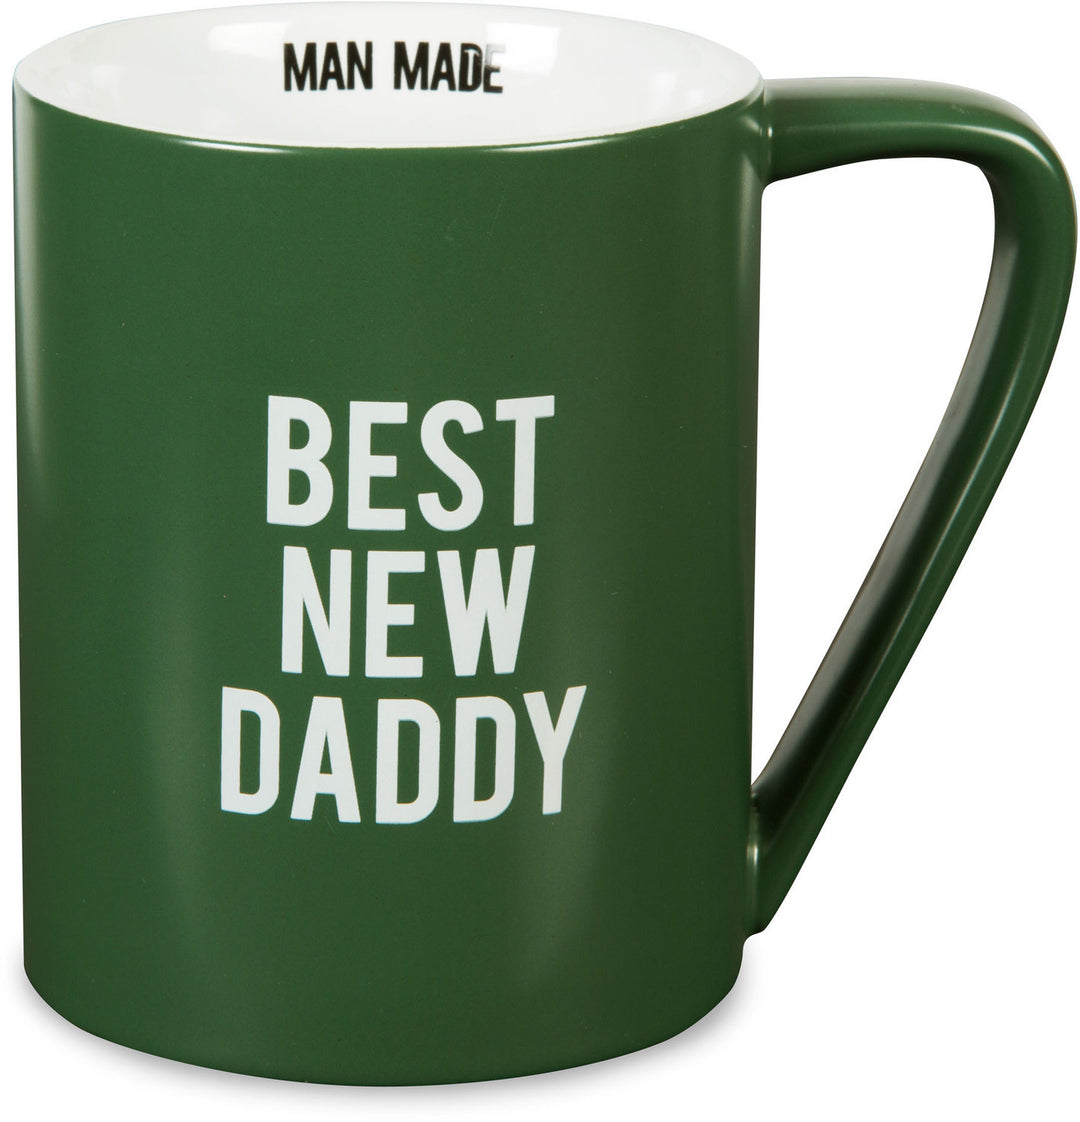 Best New Daddy Ceramic Mug (Man Made) by Pavilion Gifts (Front)